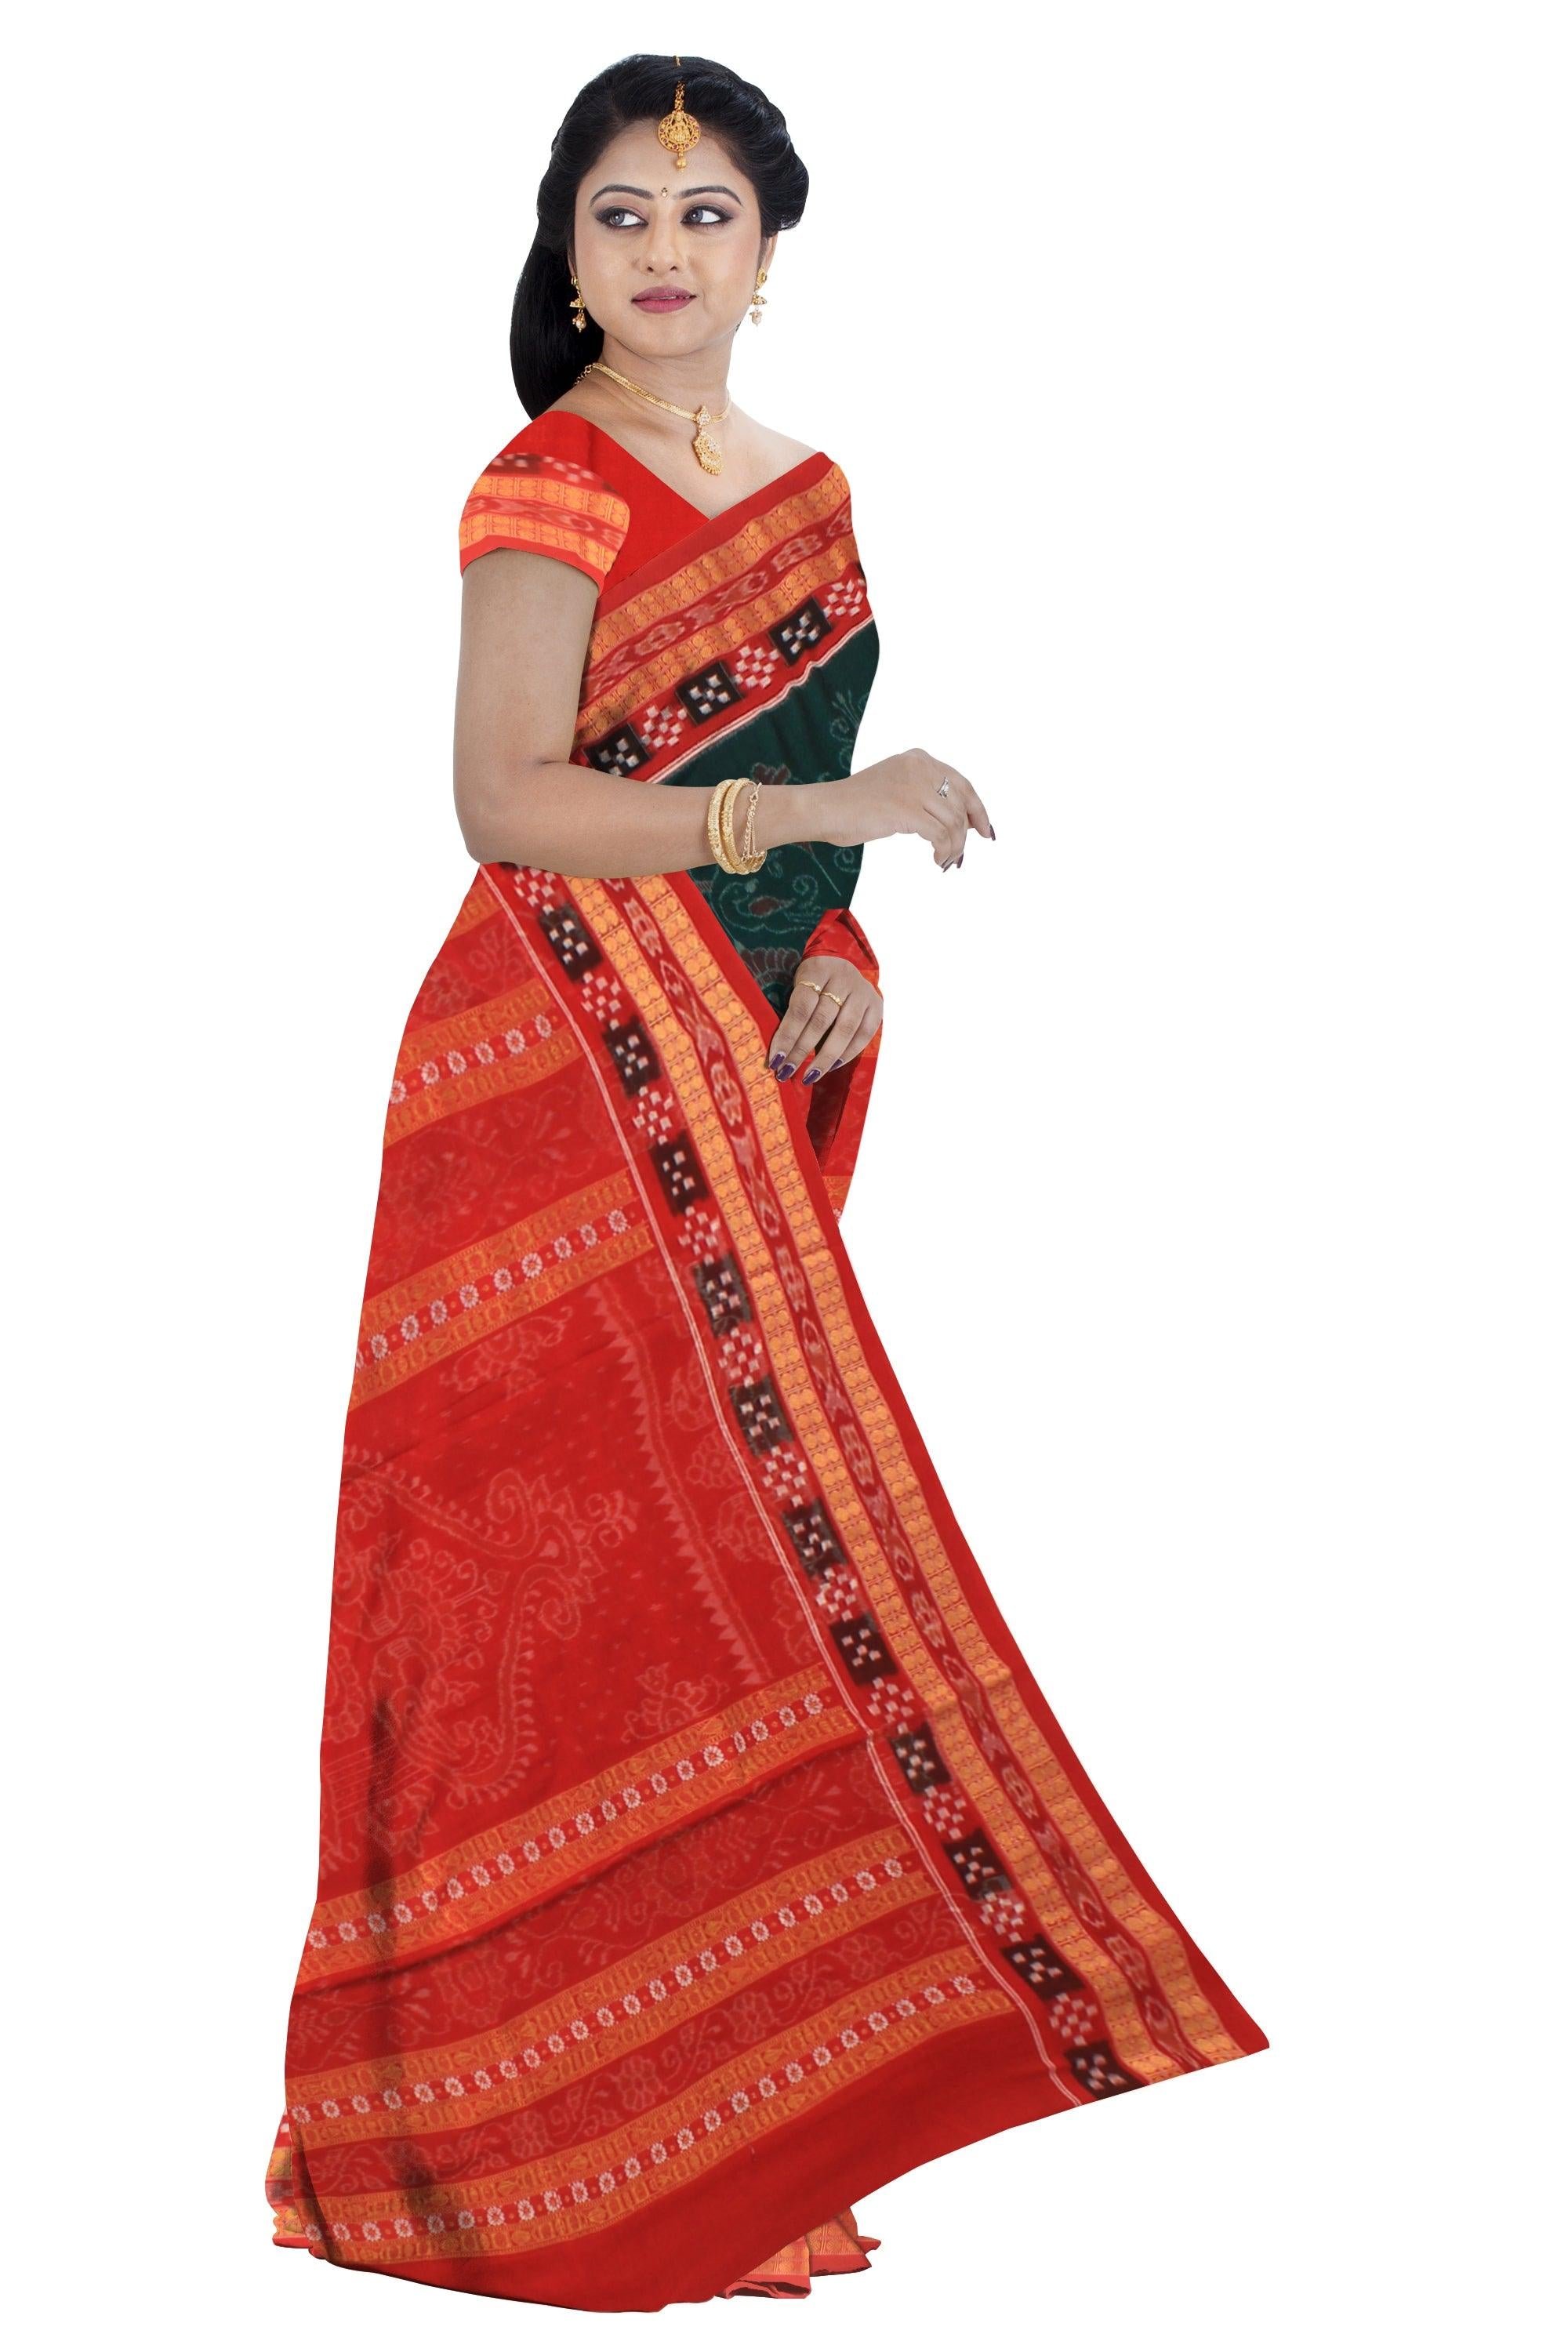 Tree, Flower and Mayuri design Smbalpuri cotton saree in dark Green and Red colour with blouse piece. - Koshali Arts & Crafts Enterprise